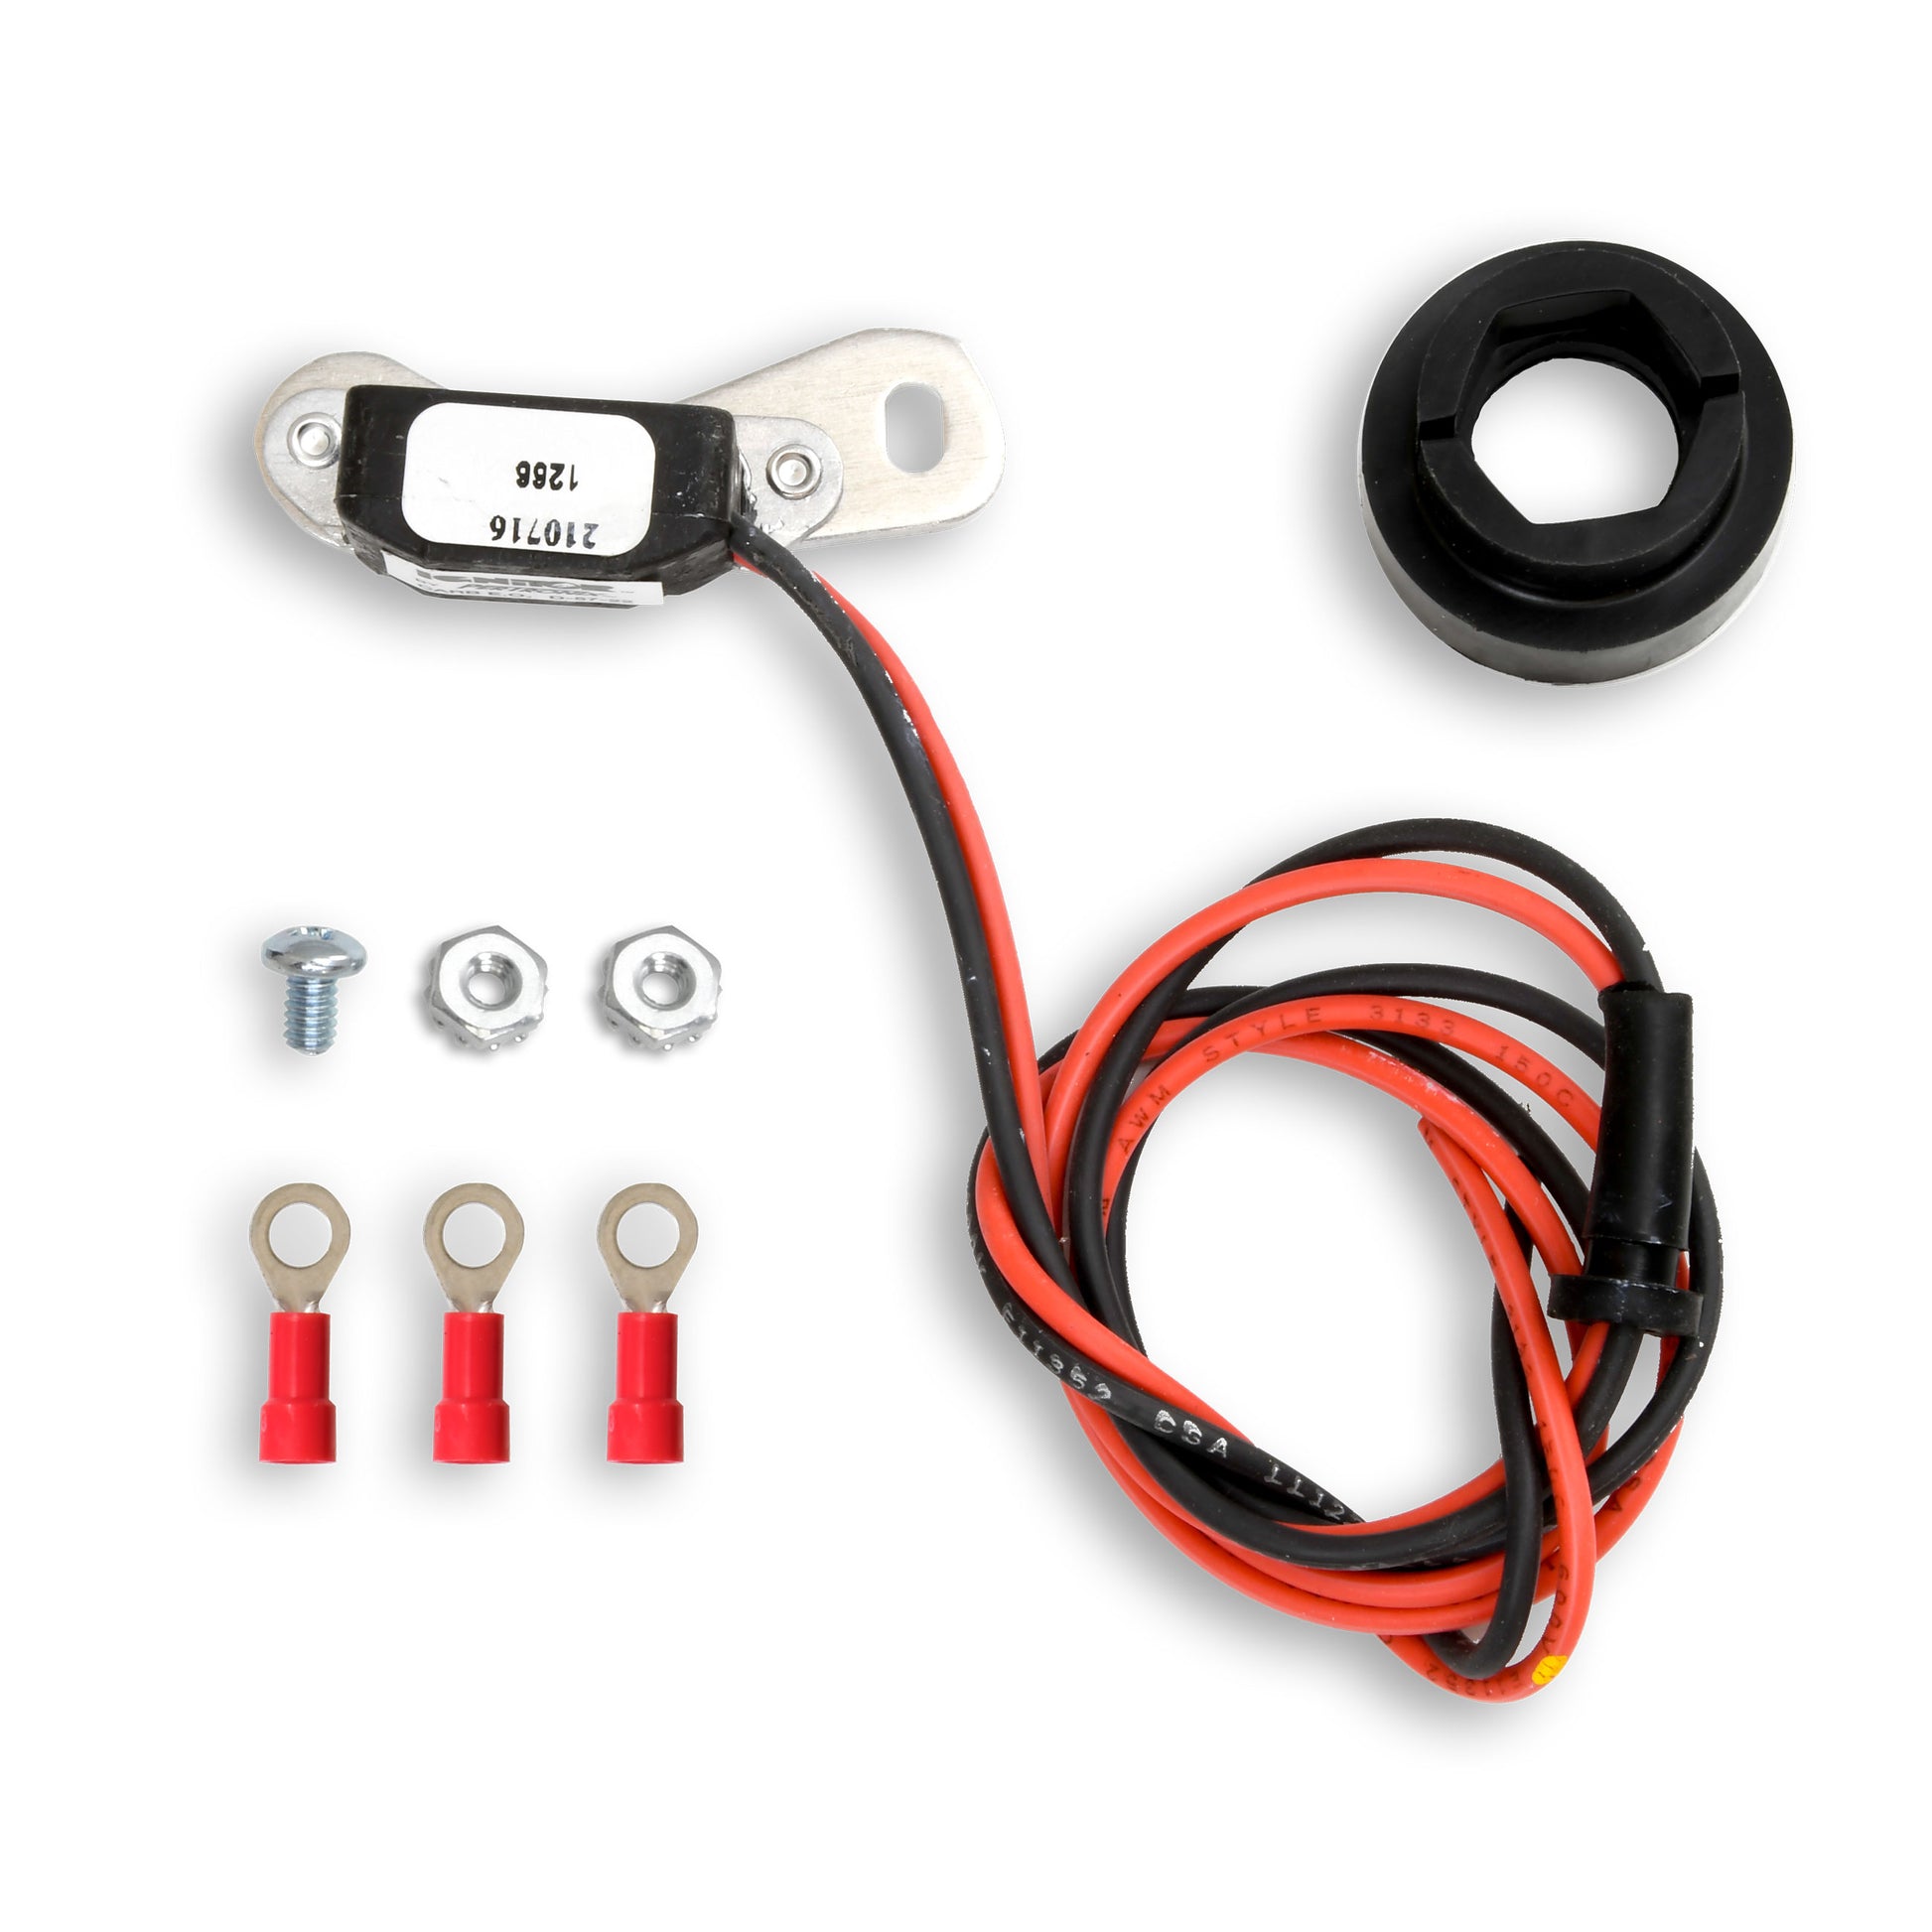 PerTronix Ignitor Electronic Ignition Conversion Kit-1266
